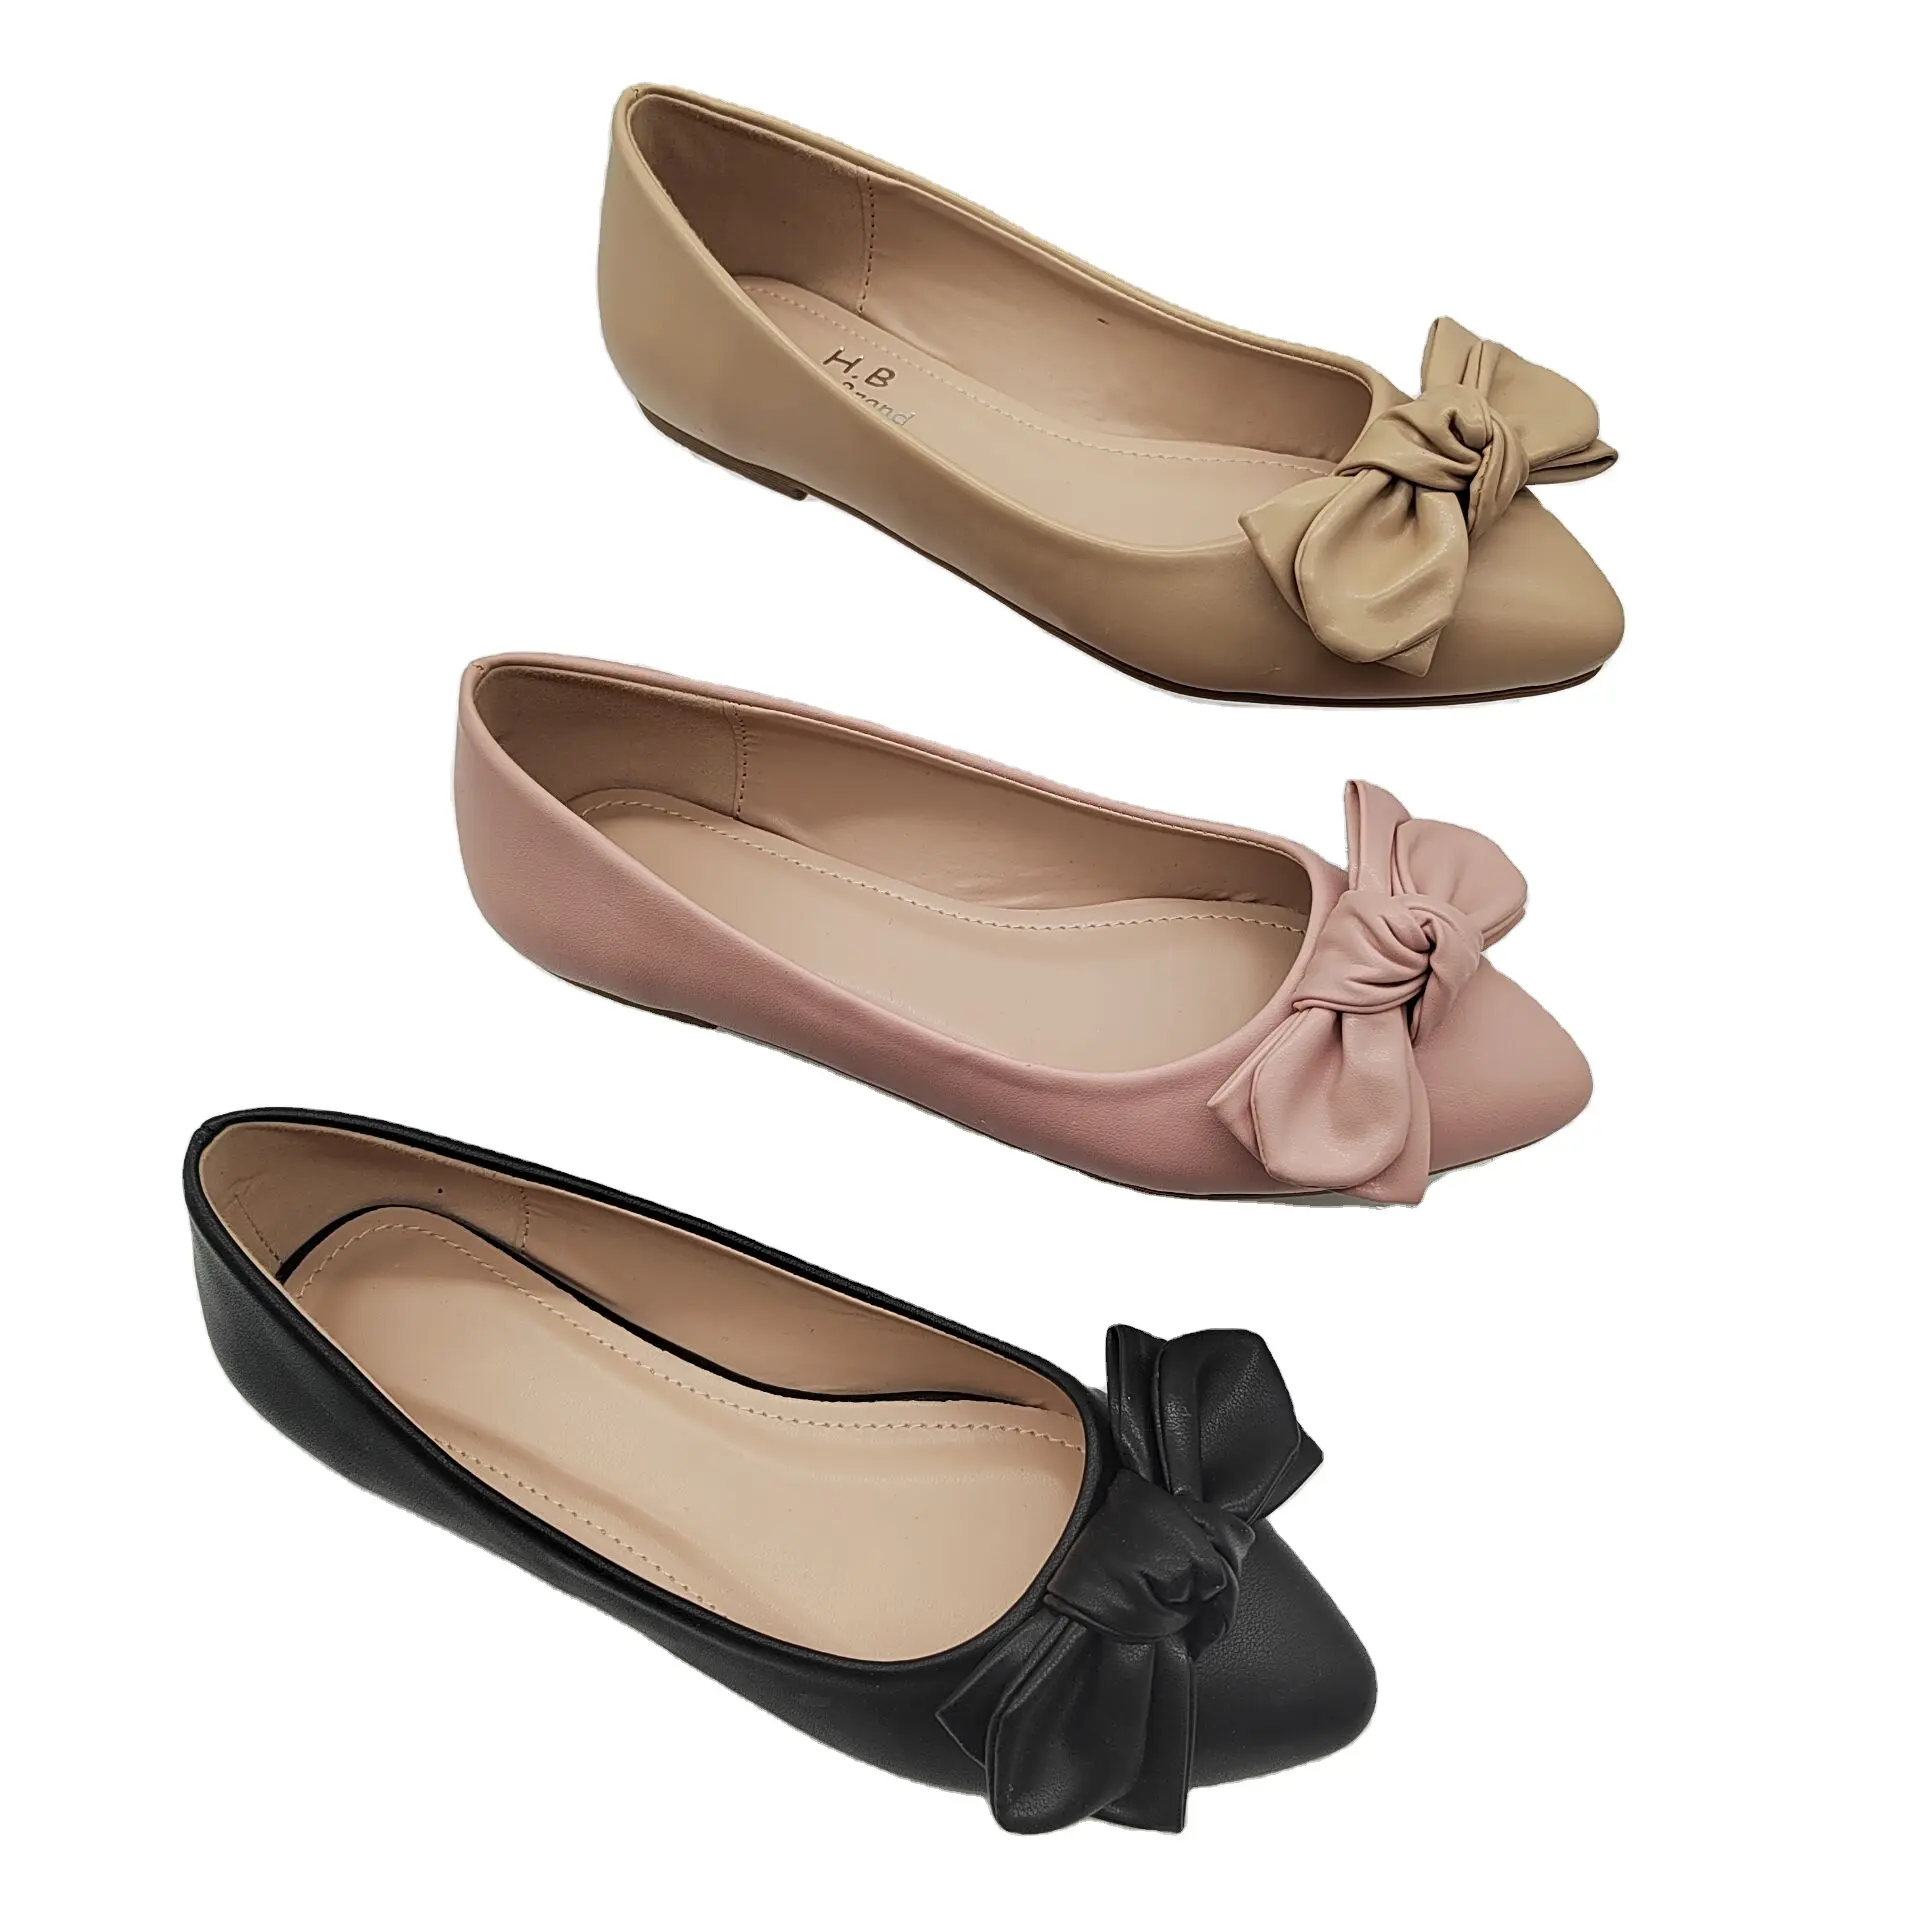 Wholesale elegant pump shoes ladies PU leather flats comfortable with bow shoes girls